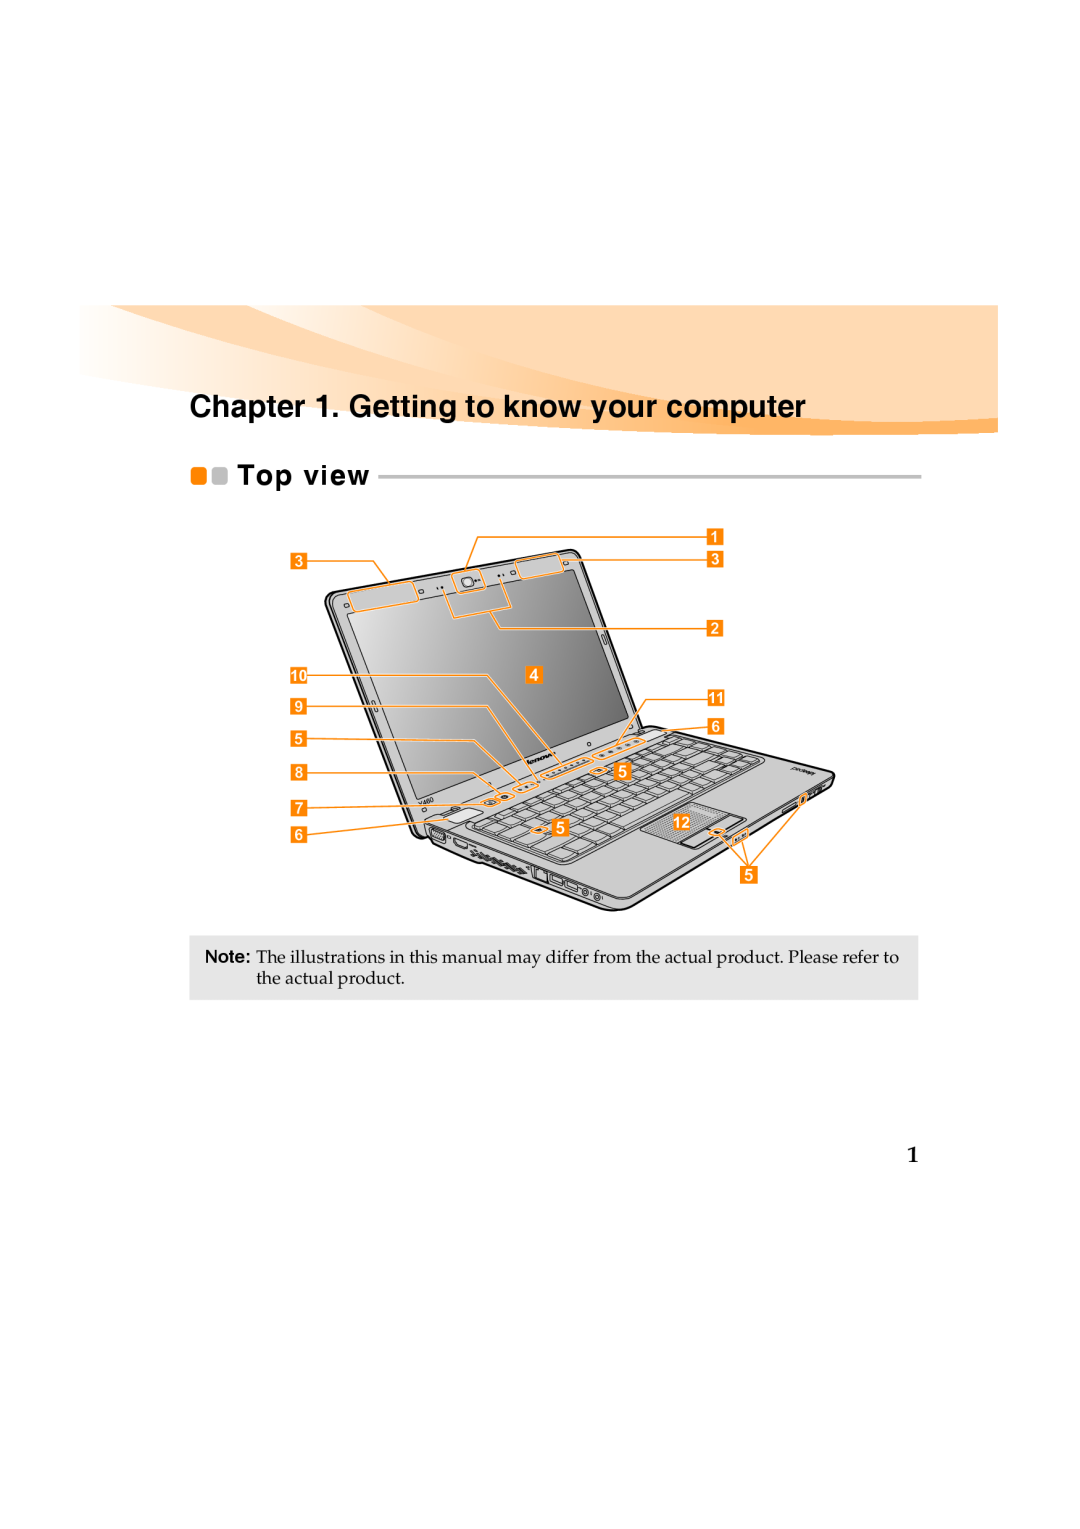 Lenovo Y460 manual Getting to know your computer, Top view 